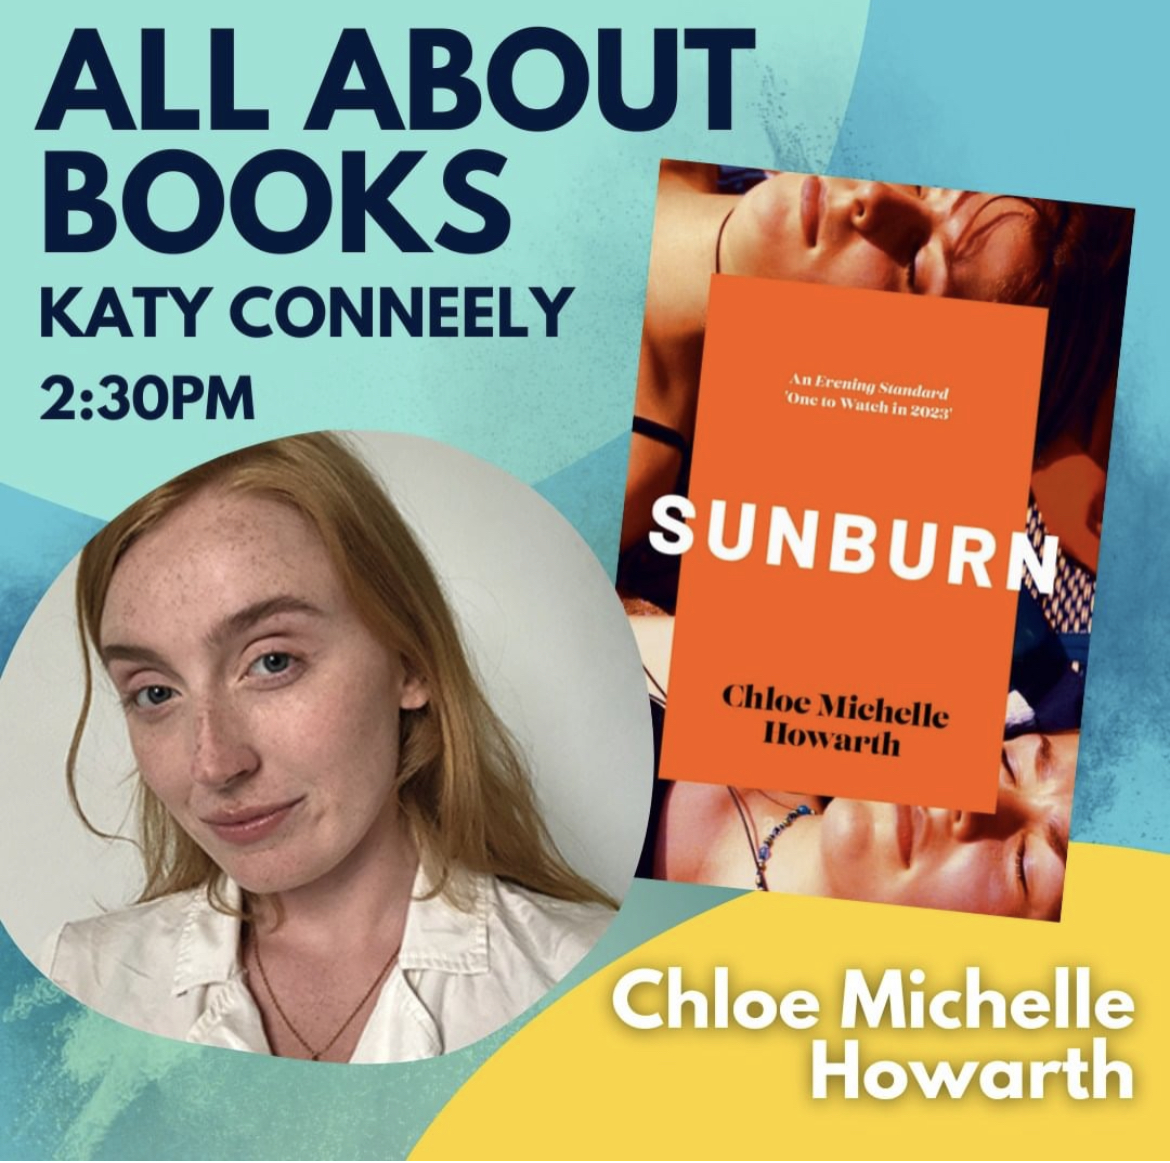 Listen to @ChloeMHowarth chat to @whatkatythought on #AllAboutBooks about the inspiration behind her debut novel SUNBURN! Listen here 🎧👉 bit.ly/AllAboutBooksS… Read SUNBURN now 👉 amzn.to/3UdzoMF #summertbr #sunburnnovel